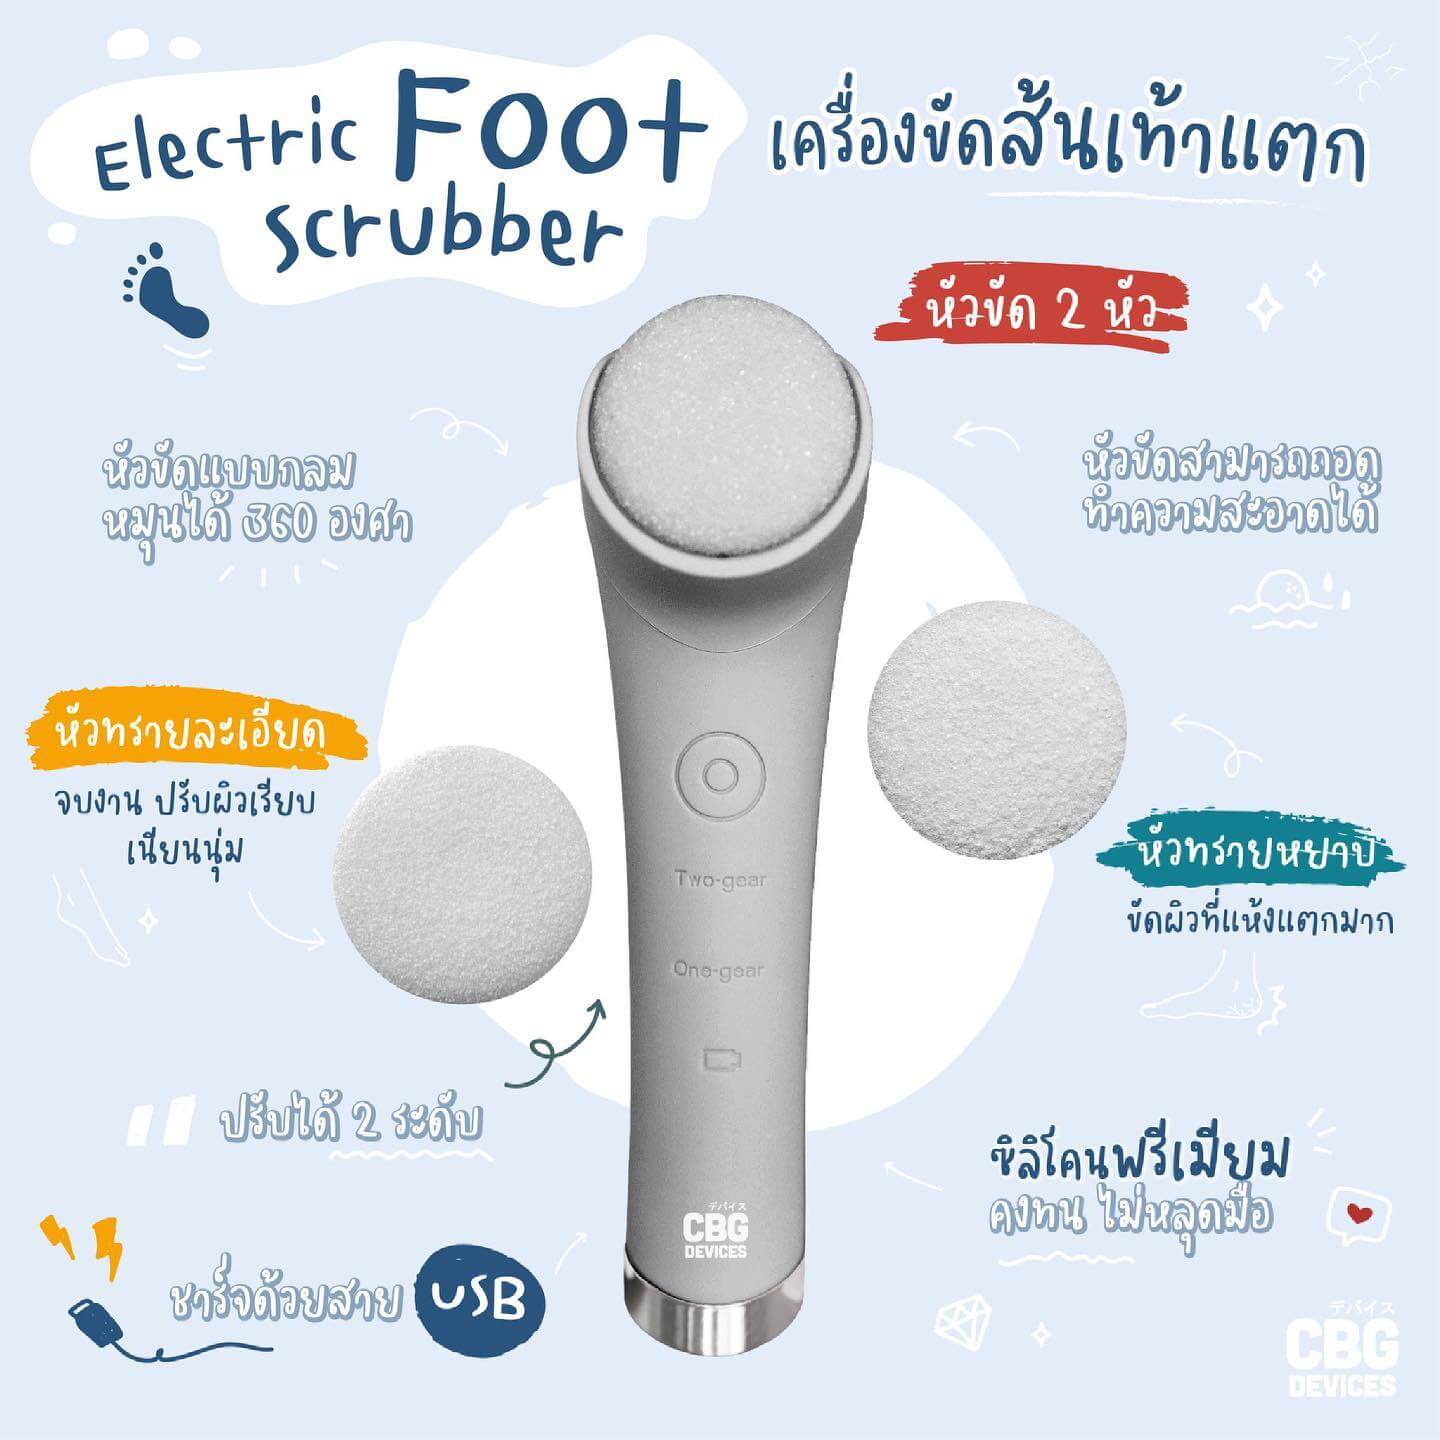 Cbg Devices,Electric Foot,Electric Foot Scrubber ,เครื่องขัดส้นเท้าแตก